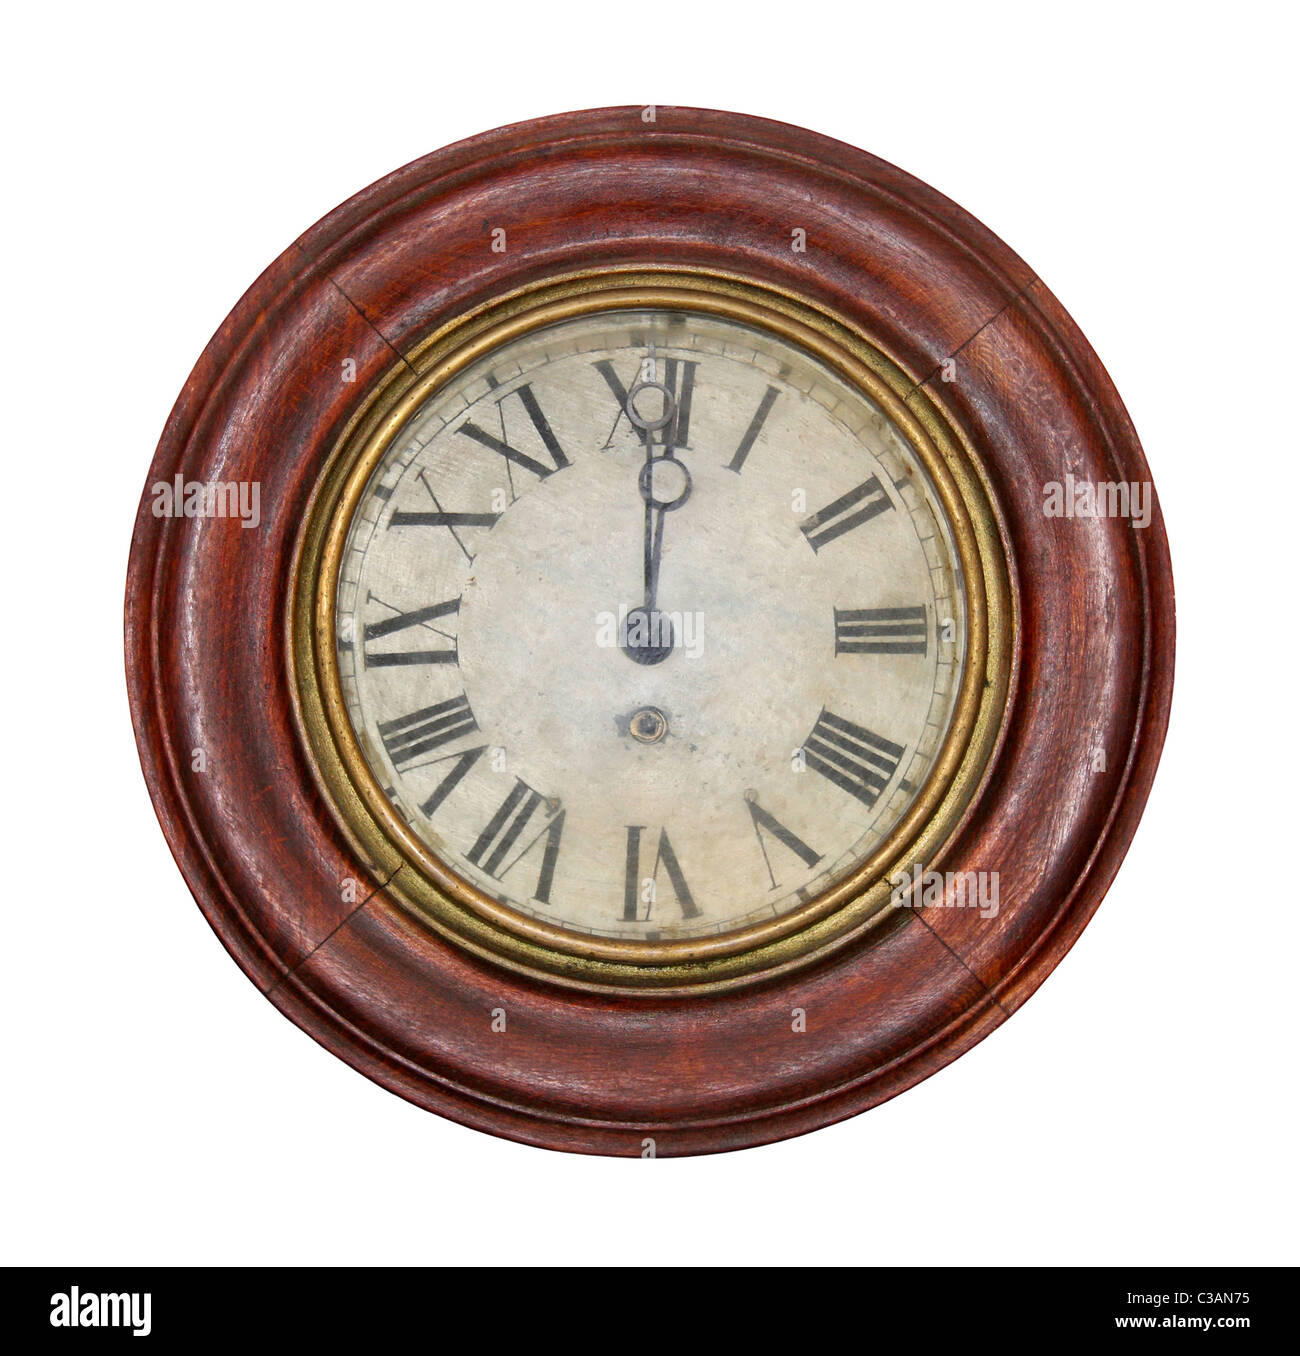 Old antique clock with roman numerals Stock Photo